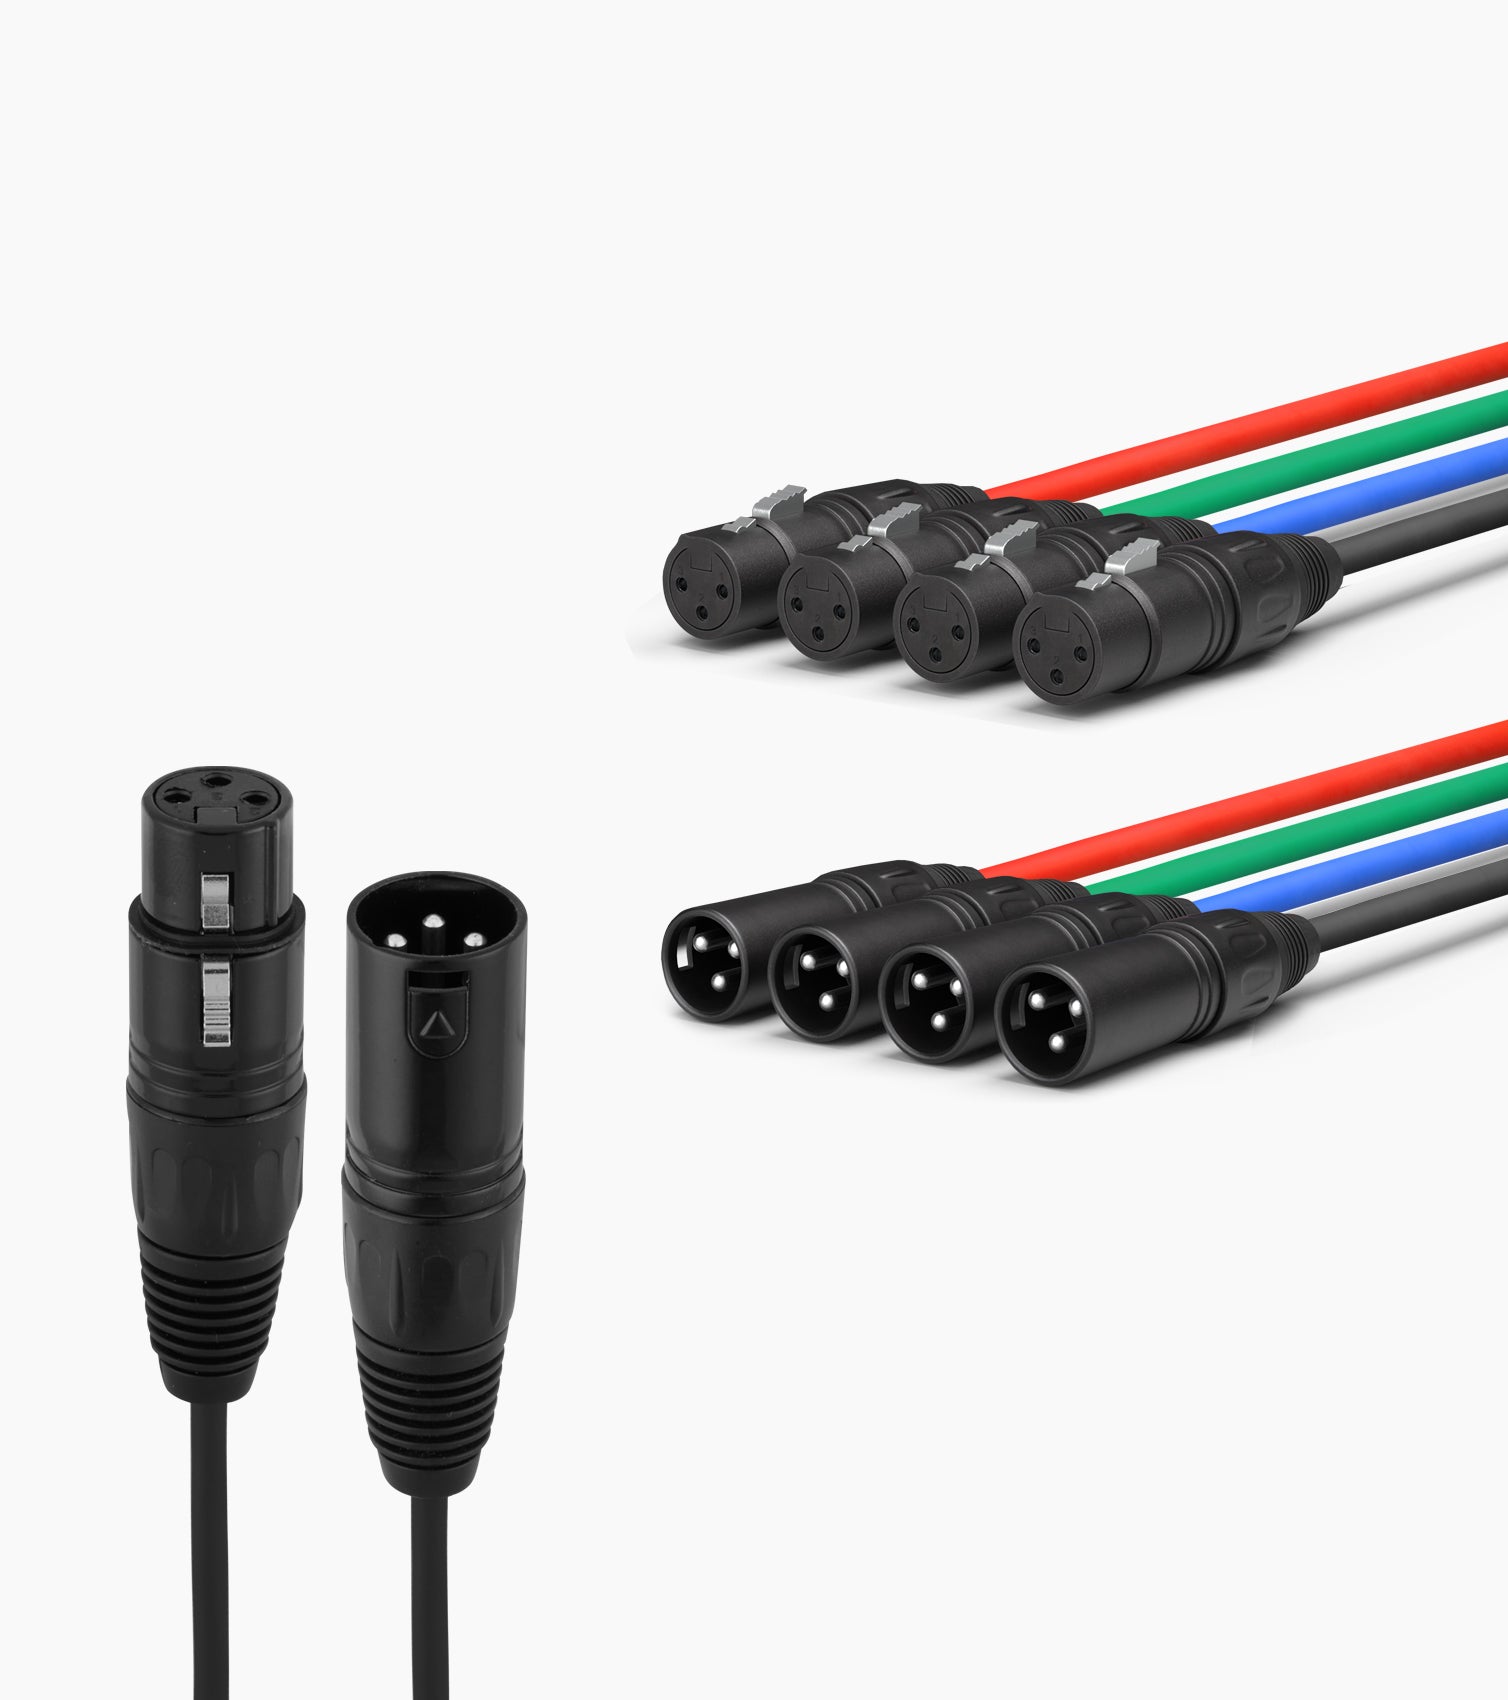 LyxPro 4-Channel XLR to Cat6 Network Cables - Cables